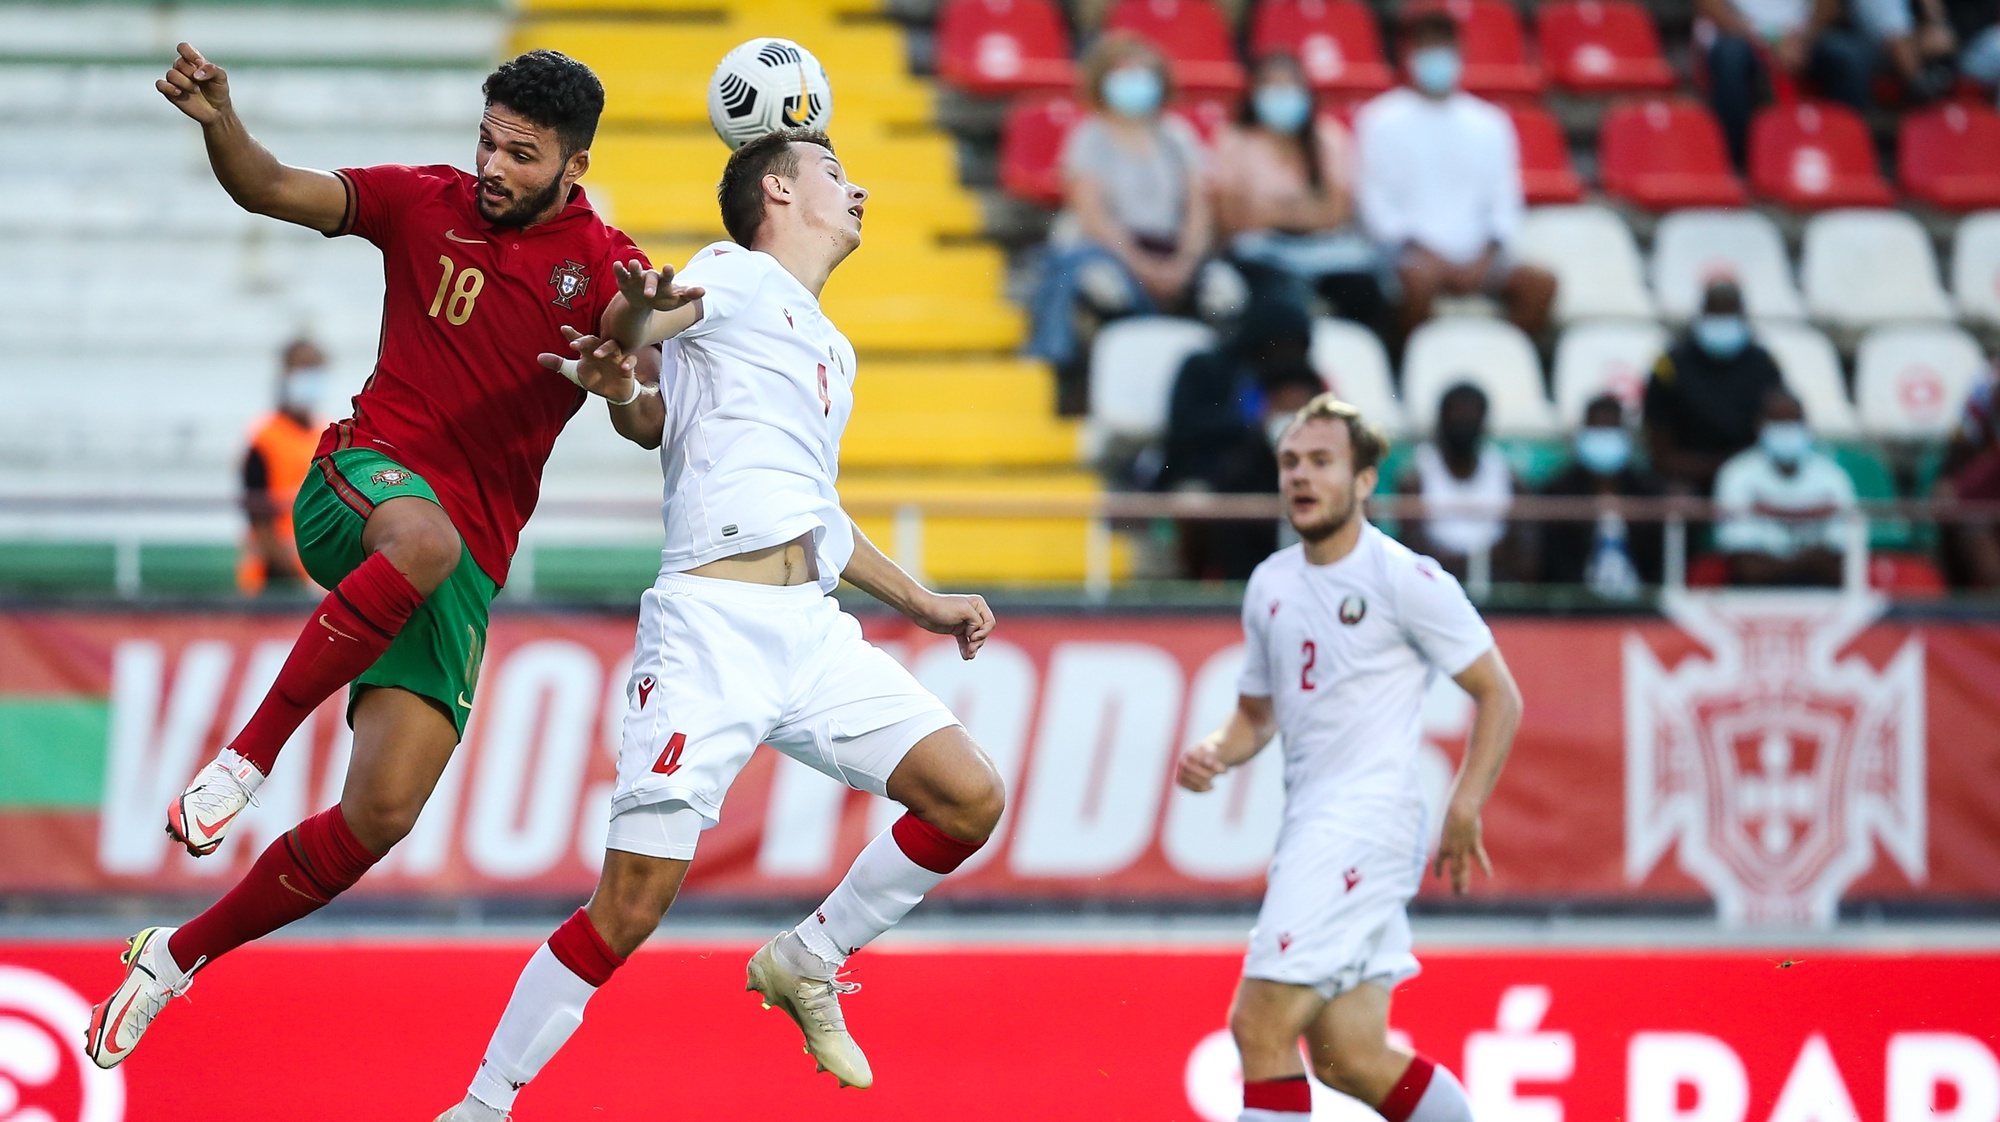 Portugal&#039;s Gonçalo Ramos (L) in action against Belarus Roman Vegerya (C) during the Euro2023 Under-21 qualifying soccer match between Portugal and Belarus at José Gomes Stadium in Lisbon, Portugal, 06 September 2021. RODRIGO ANTUNES/LUSA